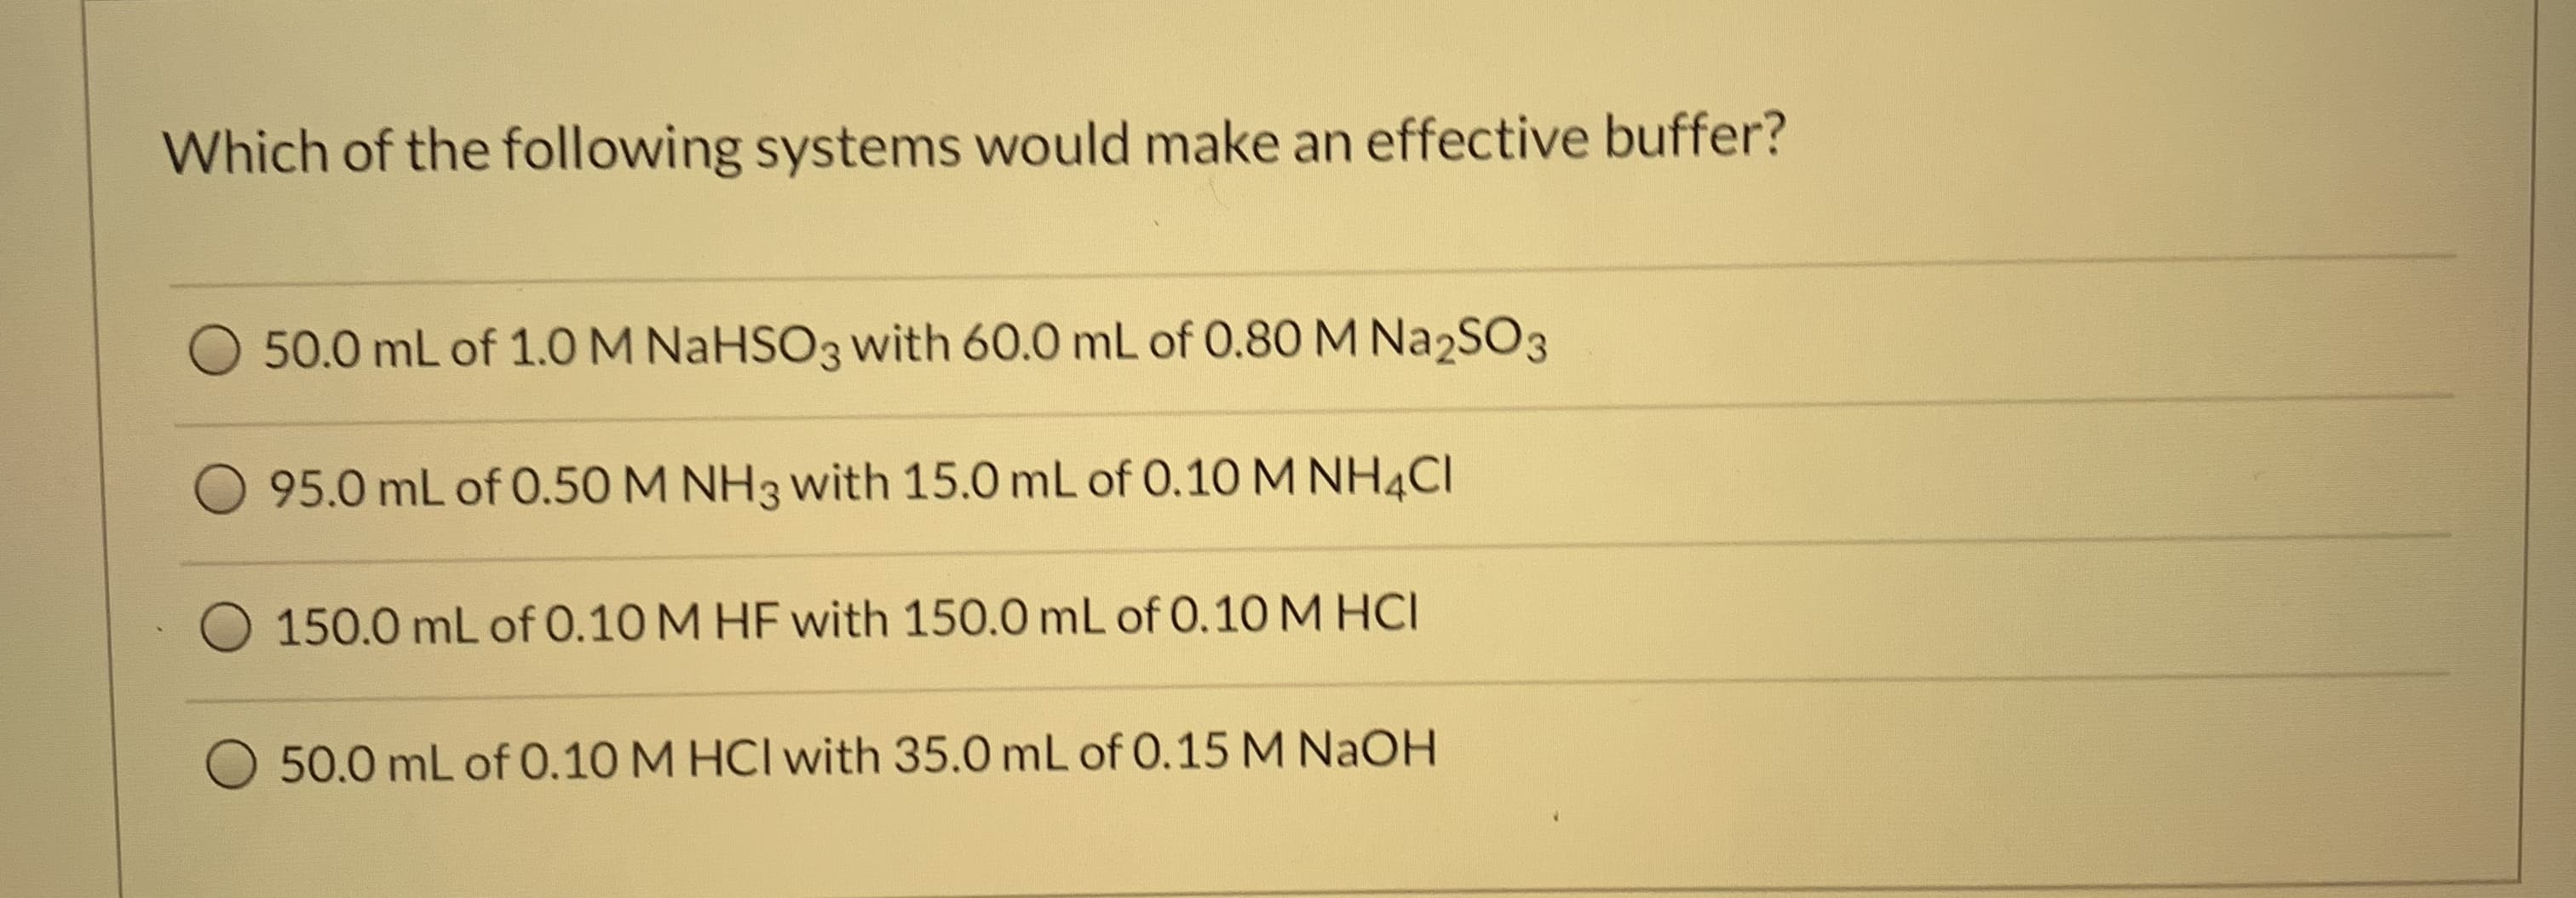 Which of the following systems would make an effective buffer?
50.0 mL of 1.0 M NaHSO3 with 60.0 mL of 0.8O M Na2SO3
95.0 mL of 0.50M NH3 with 15.0 mL of 0.10 M NH4CI
150.0 mL of 0.10 M HF with 150.0 mL of 0.10 M HCI
50.0 mL of 0.10 M HCI with 35.0 mL of 0.15 M NaOH
